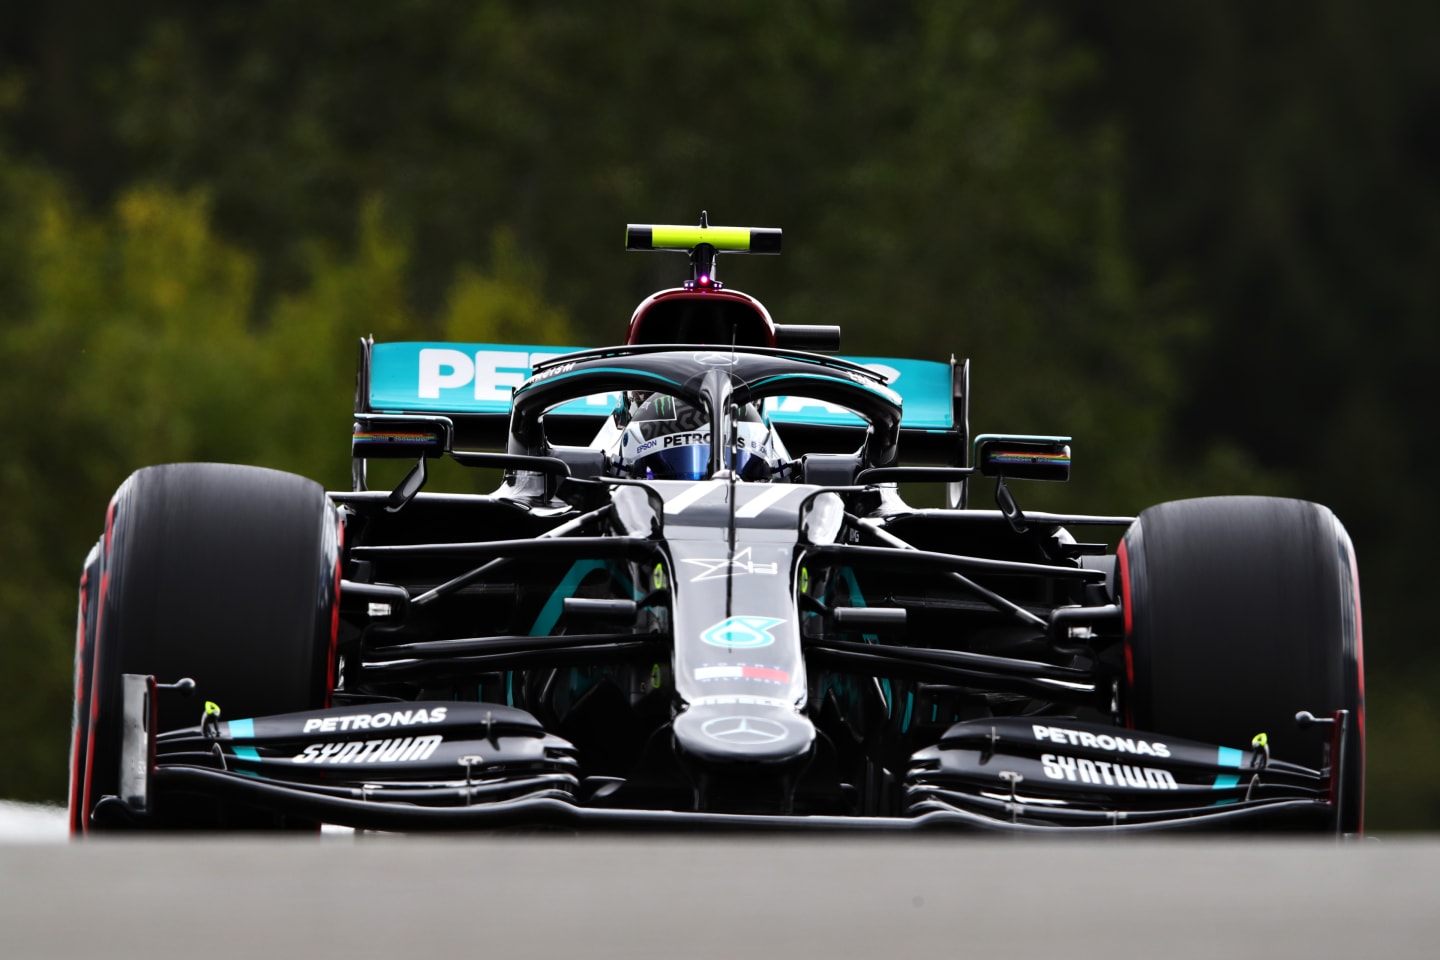 SPA, BELGIUM - AUGUST 29: Valtteri Bottas of Finland driving the (77) Mercedes AMG Petronas F1 Team Mercedes W11 during qualifying for the F1 Grand Prix of Belgium at Circuit de Spa-Francorchamps on August 29, 2020 in Spa, Belgium. (Photo by Mark Thompson/Getty Images)